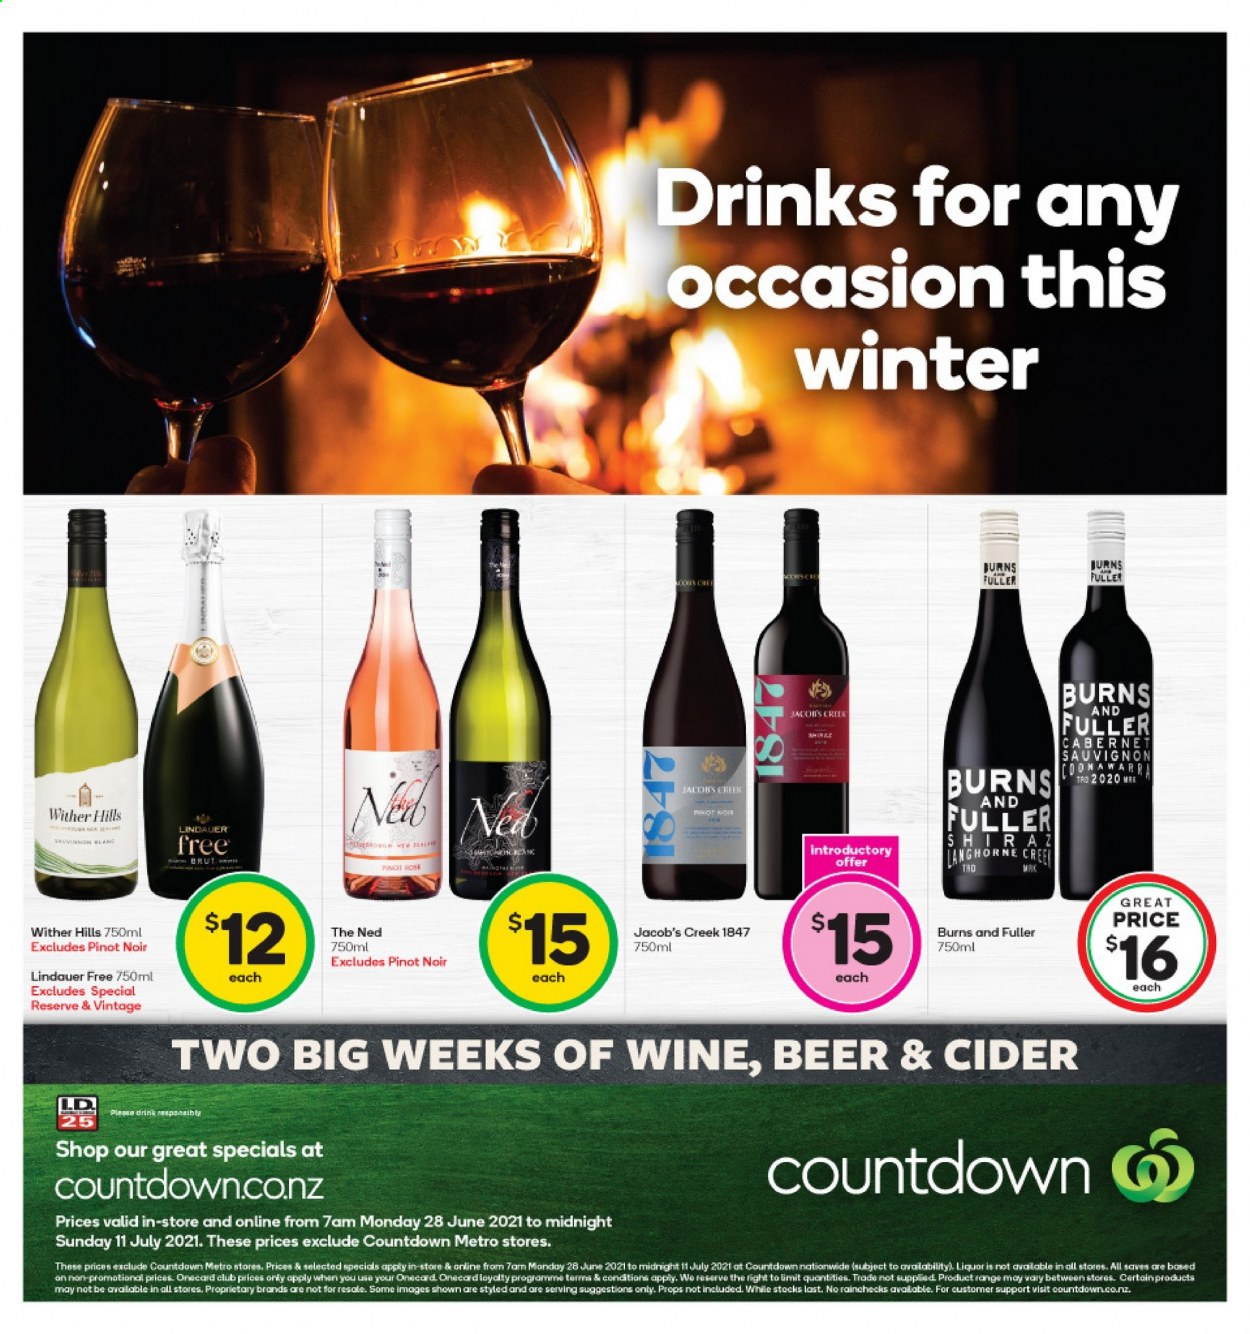 thumbnail - Countdown mailer - 28.06.2021 - 11.07.2021 - Sales products - Cabernet Sauvignon, red wine, sparkling wine, Pinot Noir, Lindauer, Wither Hills, Jacob's Creek, liquor, cider, Brut, Hill's. Page 1.